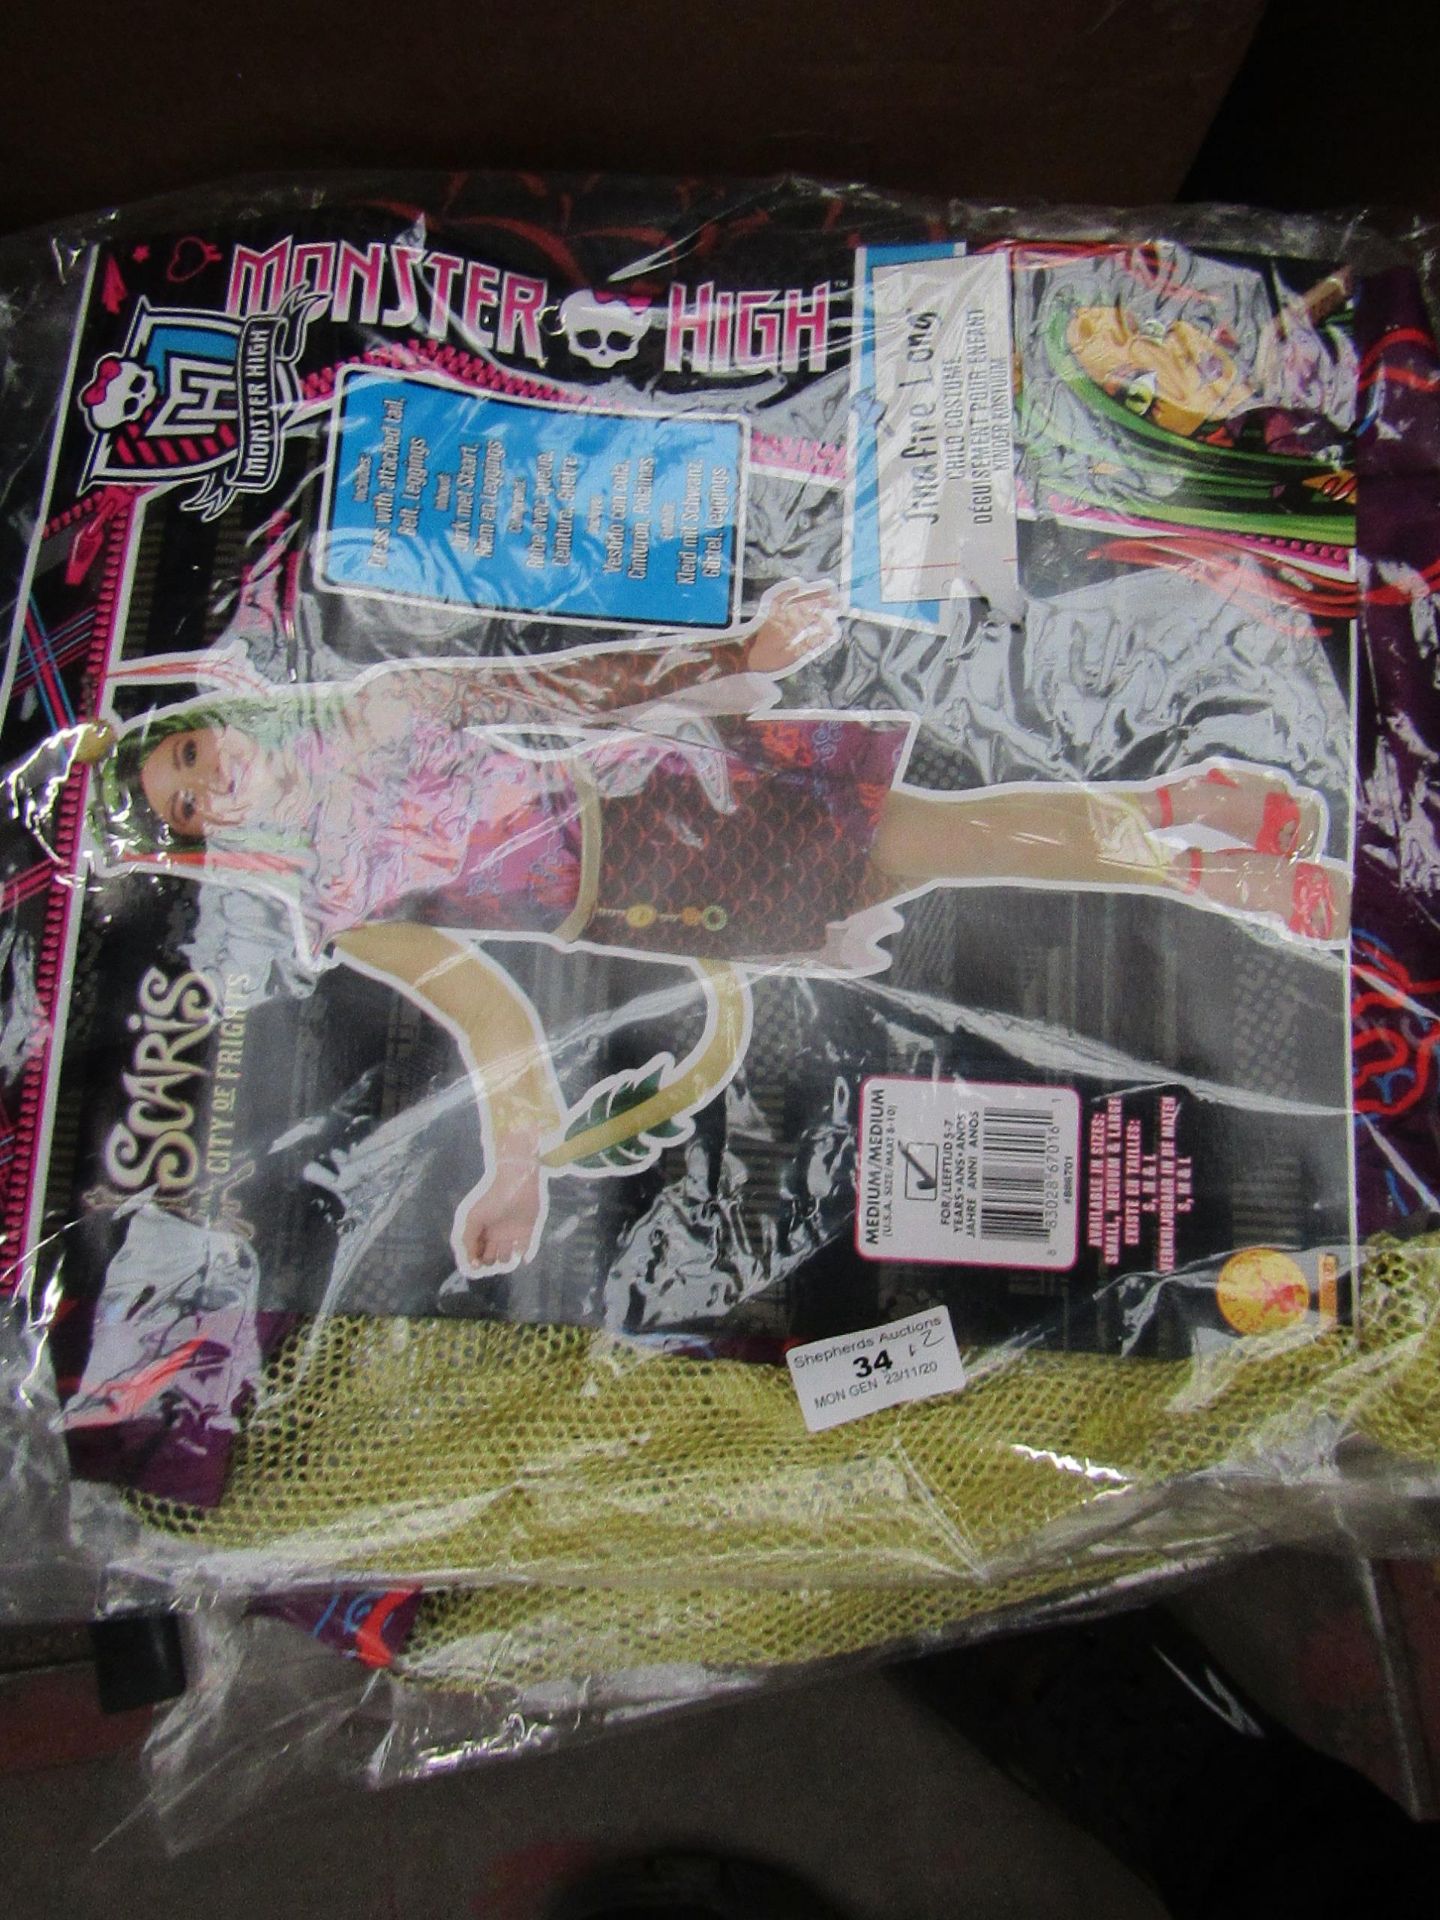 12x Monster High - Scaris City of Freights JinaFire Long Children's Costume - Unchecked & Packaged.